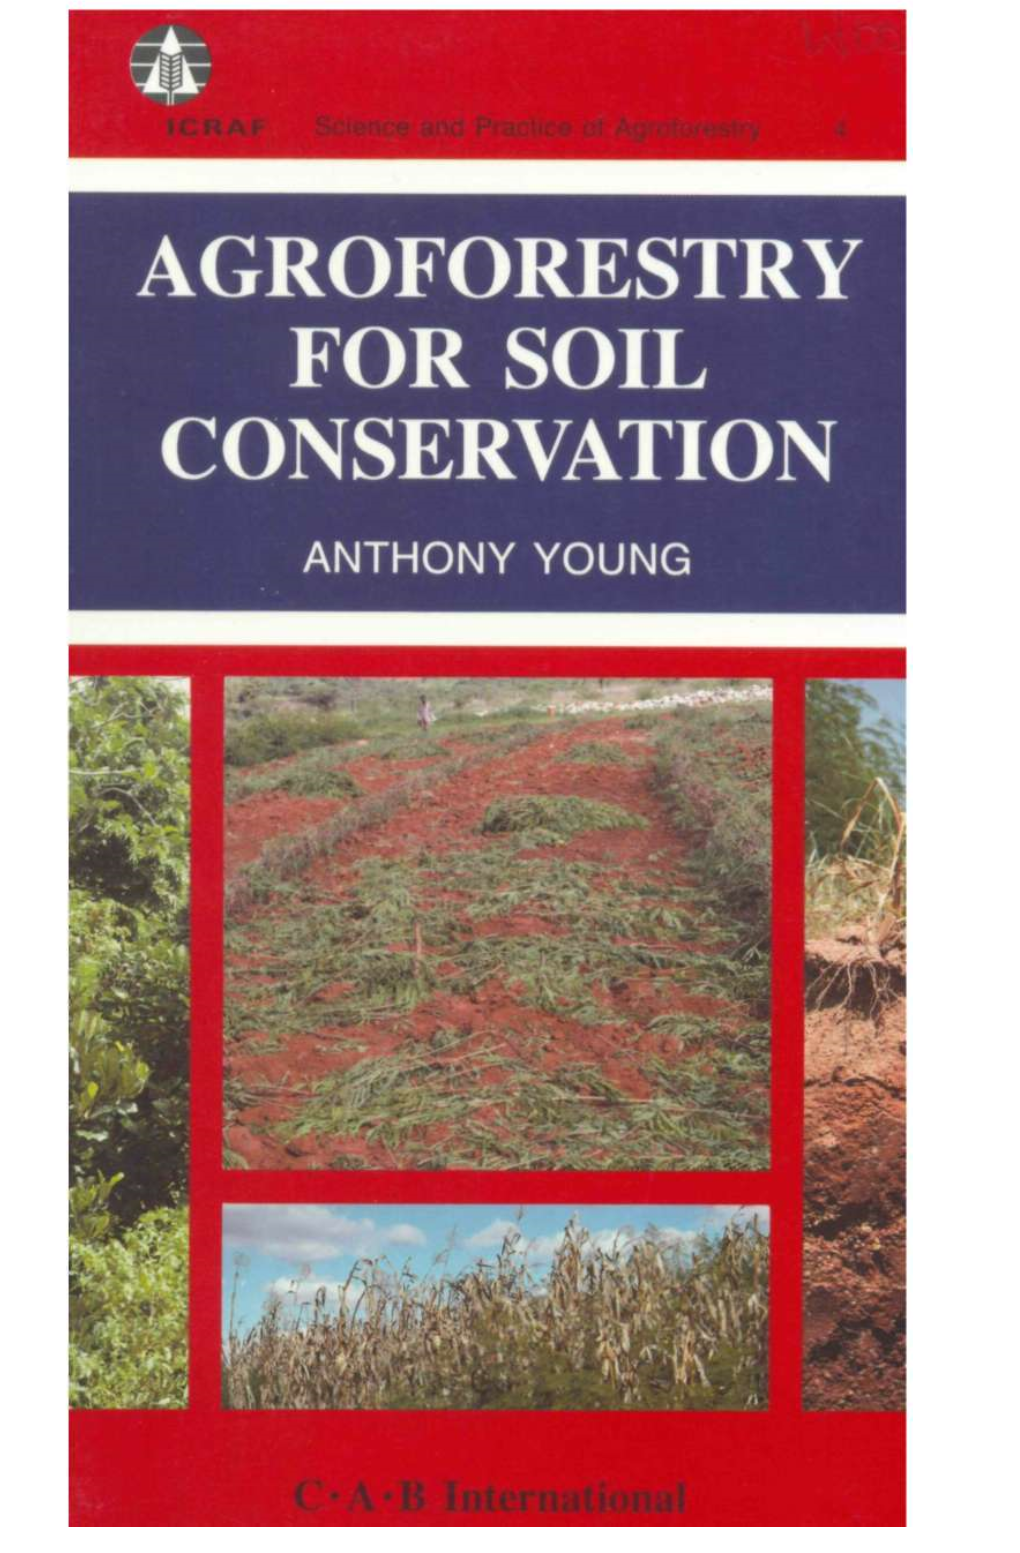 AGROFORESTRY for SOIL CONSERVATION Anthony Young